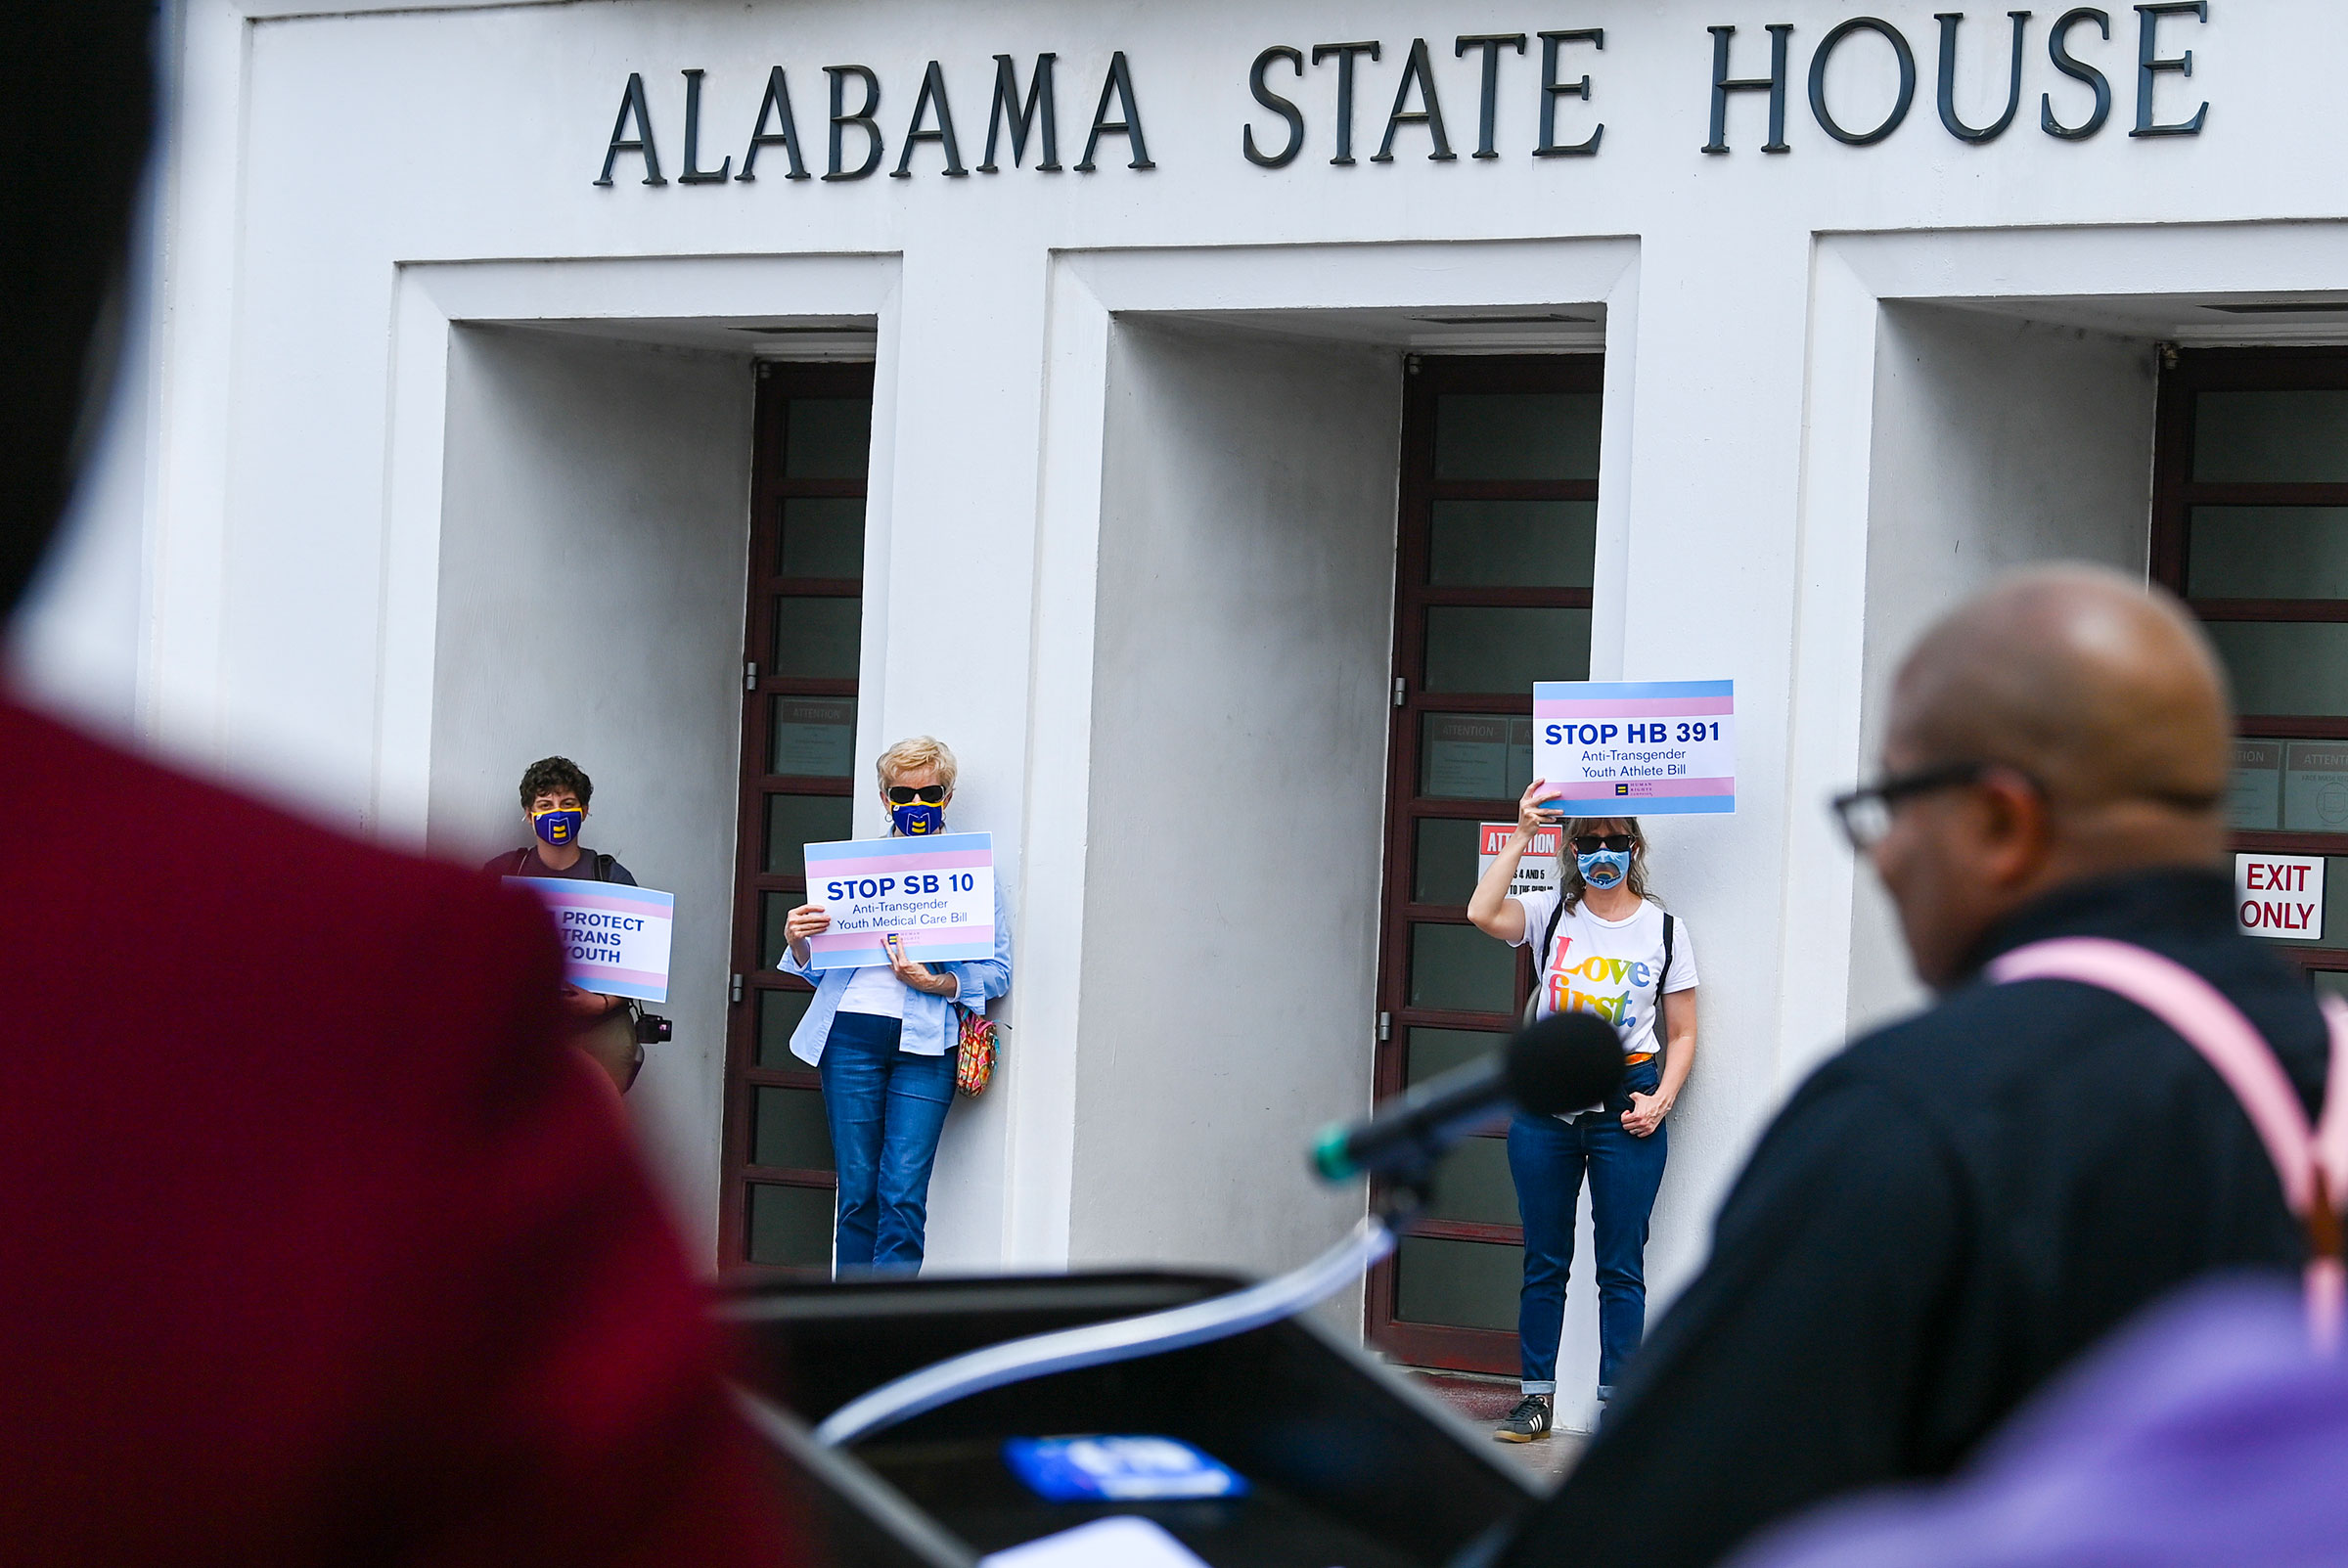 Opponents of several bills targeting transgender youth attend a rally at the Alabama State House in Montgomery to draw attention to anti-transgender legislation introduced in Alabama on March 30, 2021. (Julie Bennett—Getty Images)